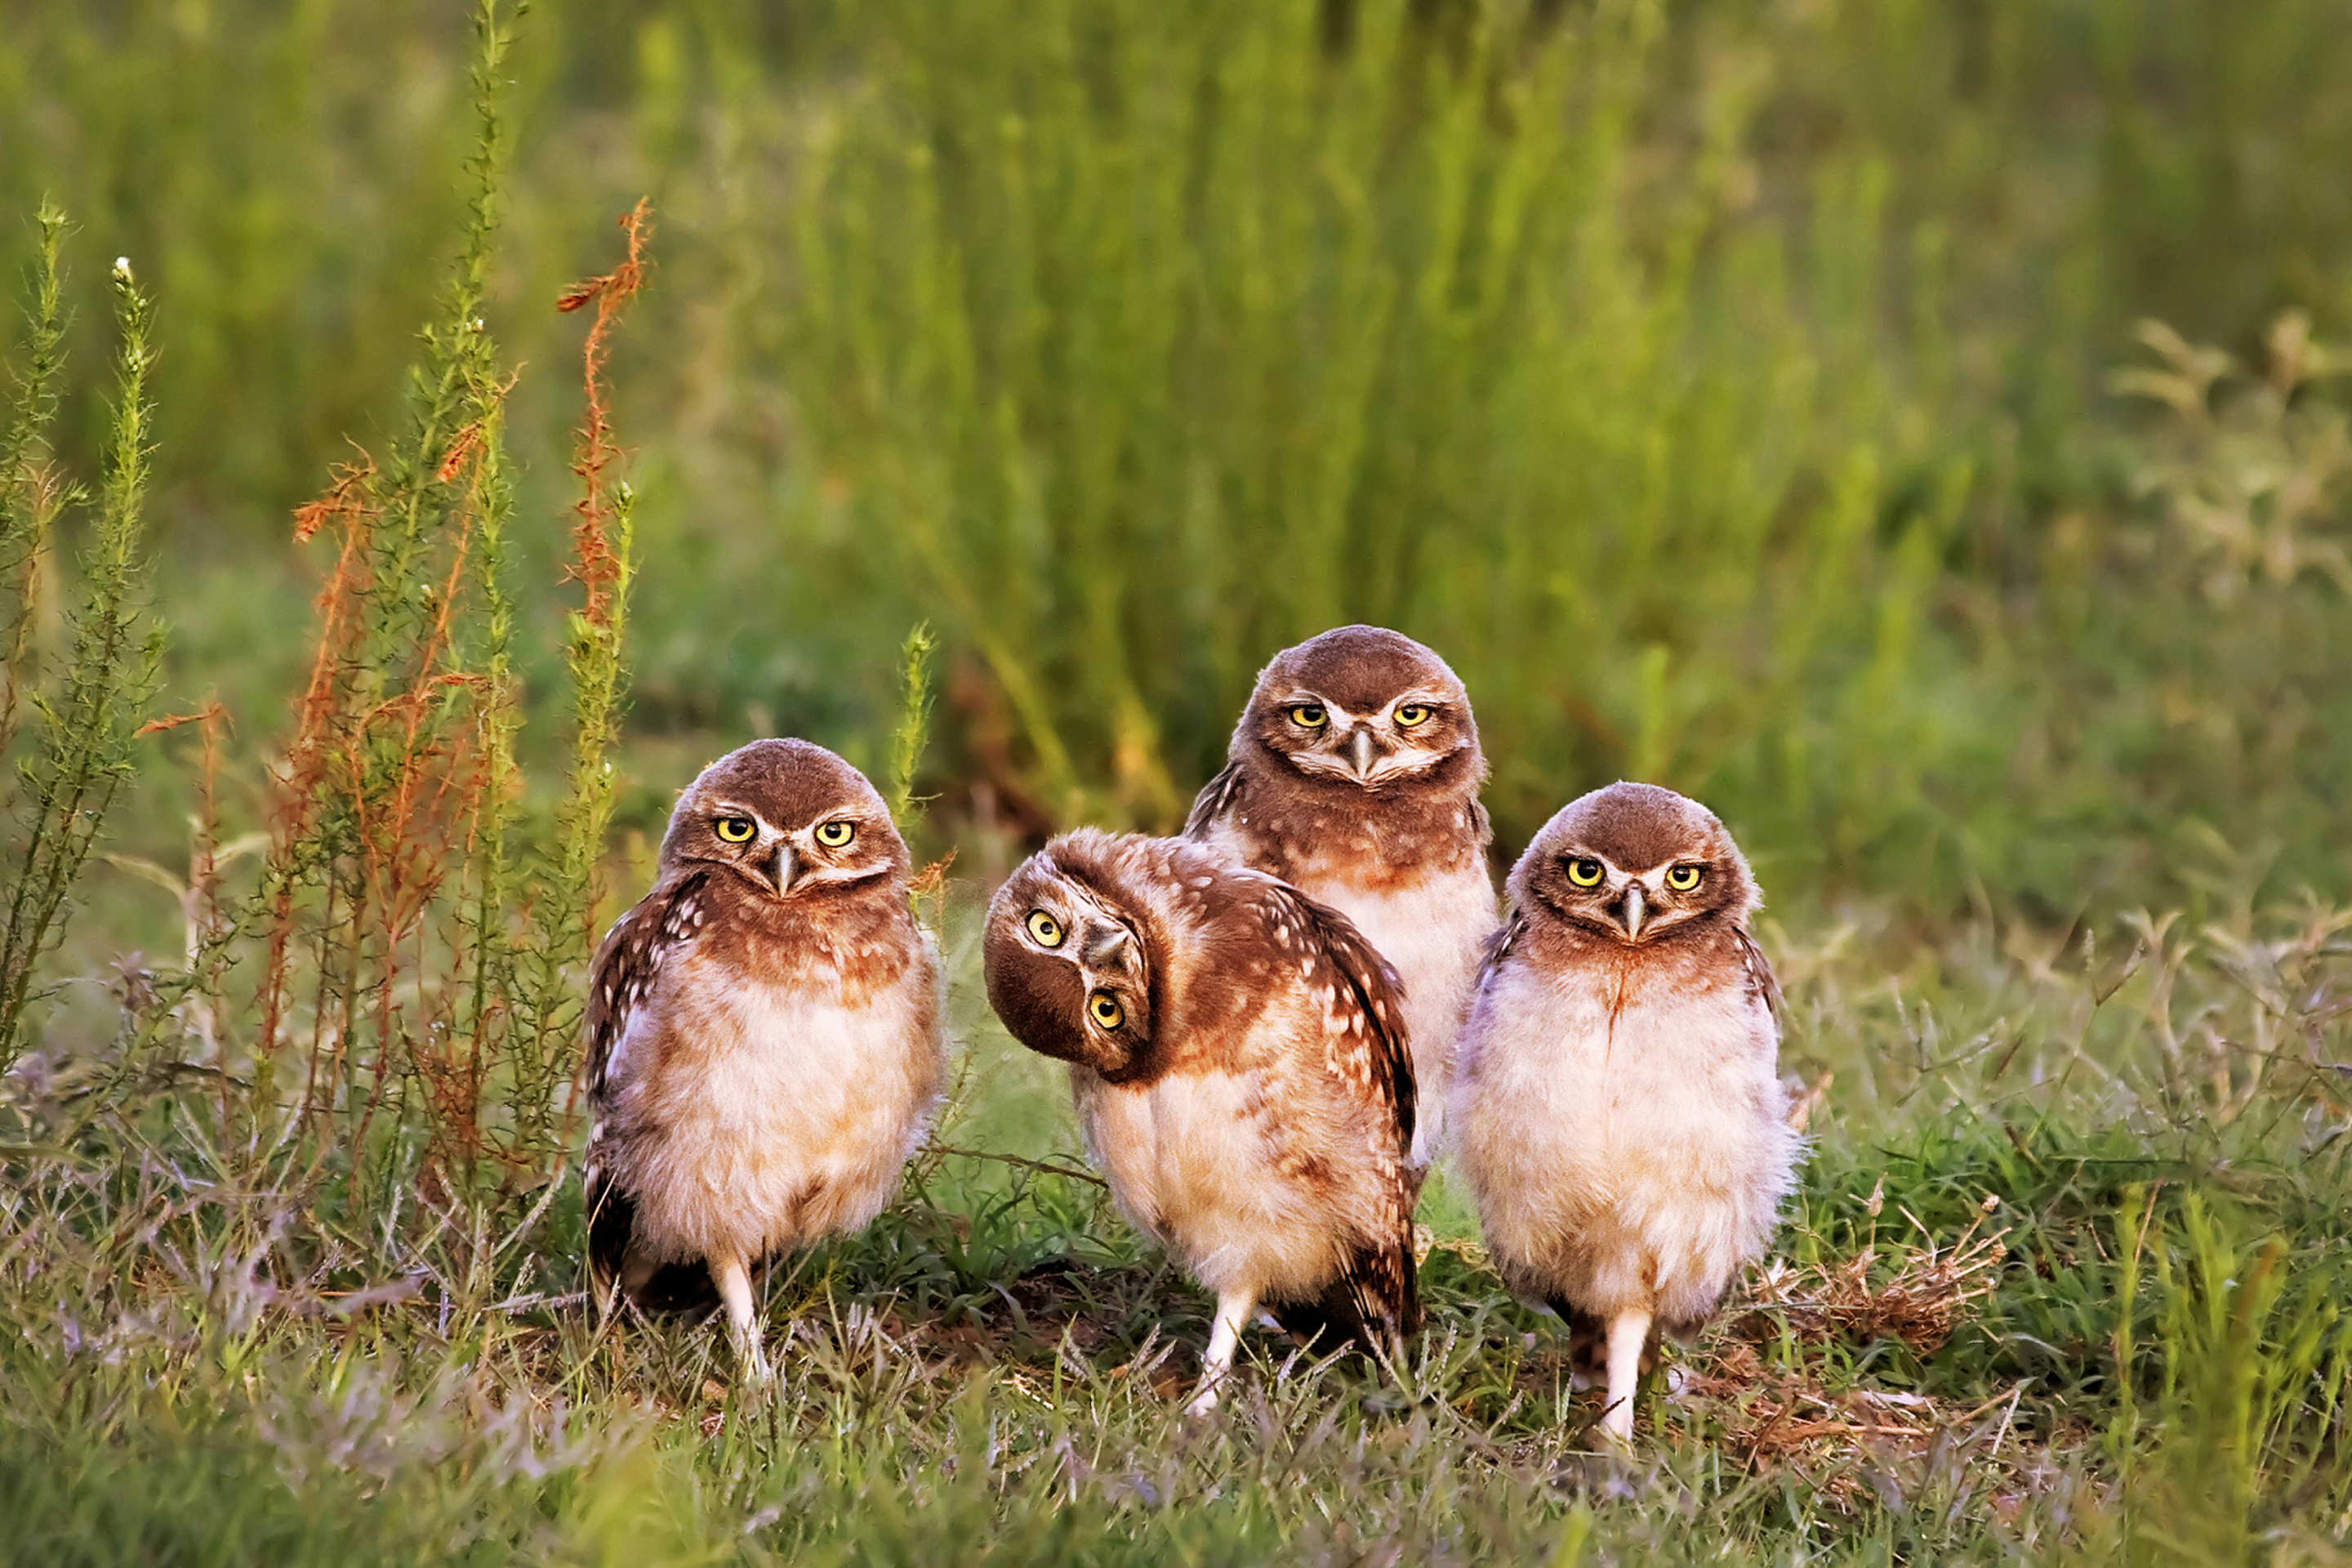 Morning with owls wallpaper 2880x1920